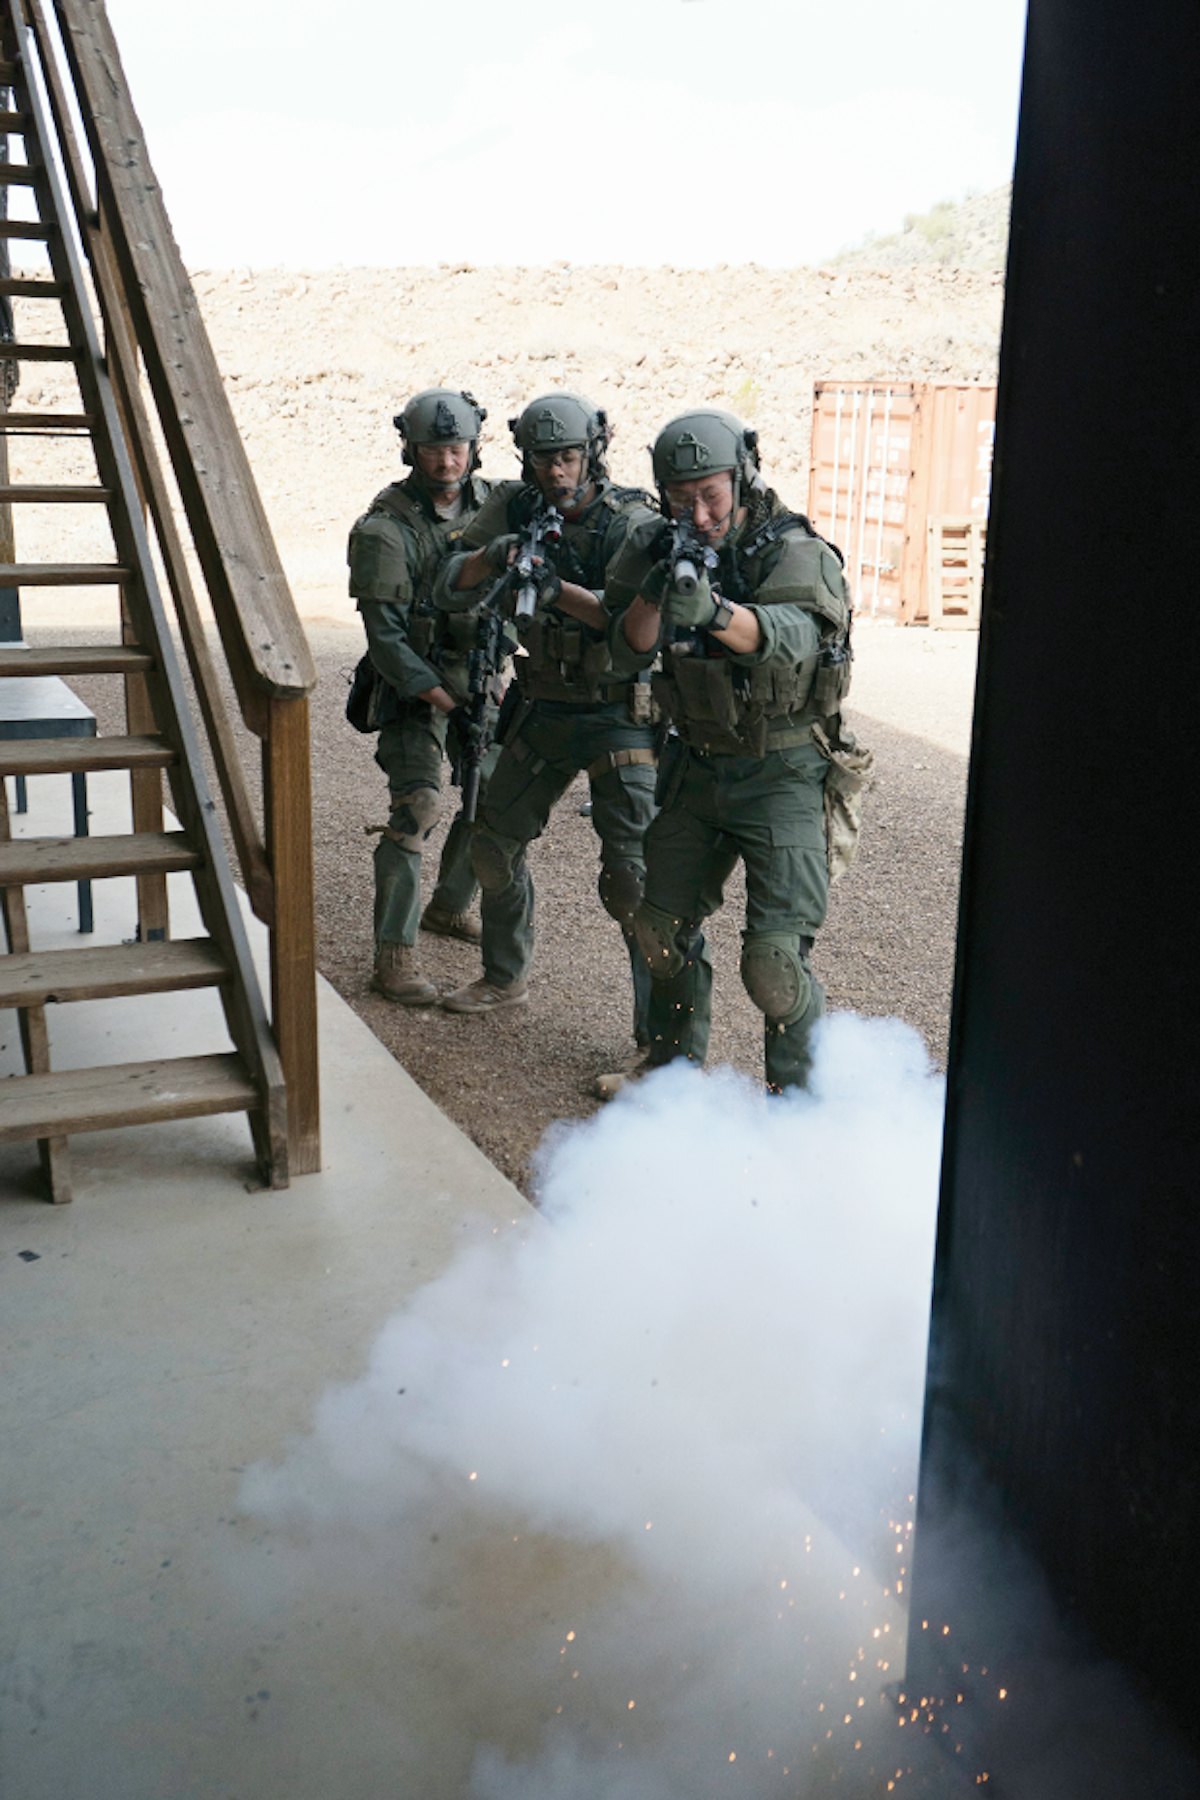 Tactical equipment investments for SWAT officers